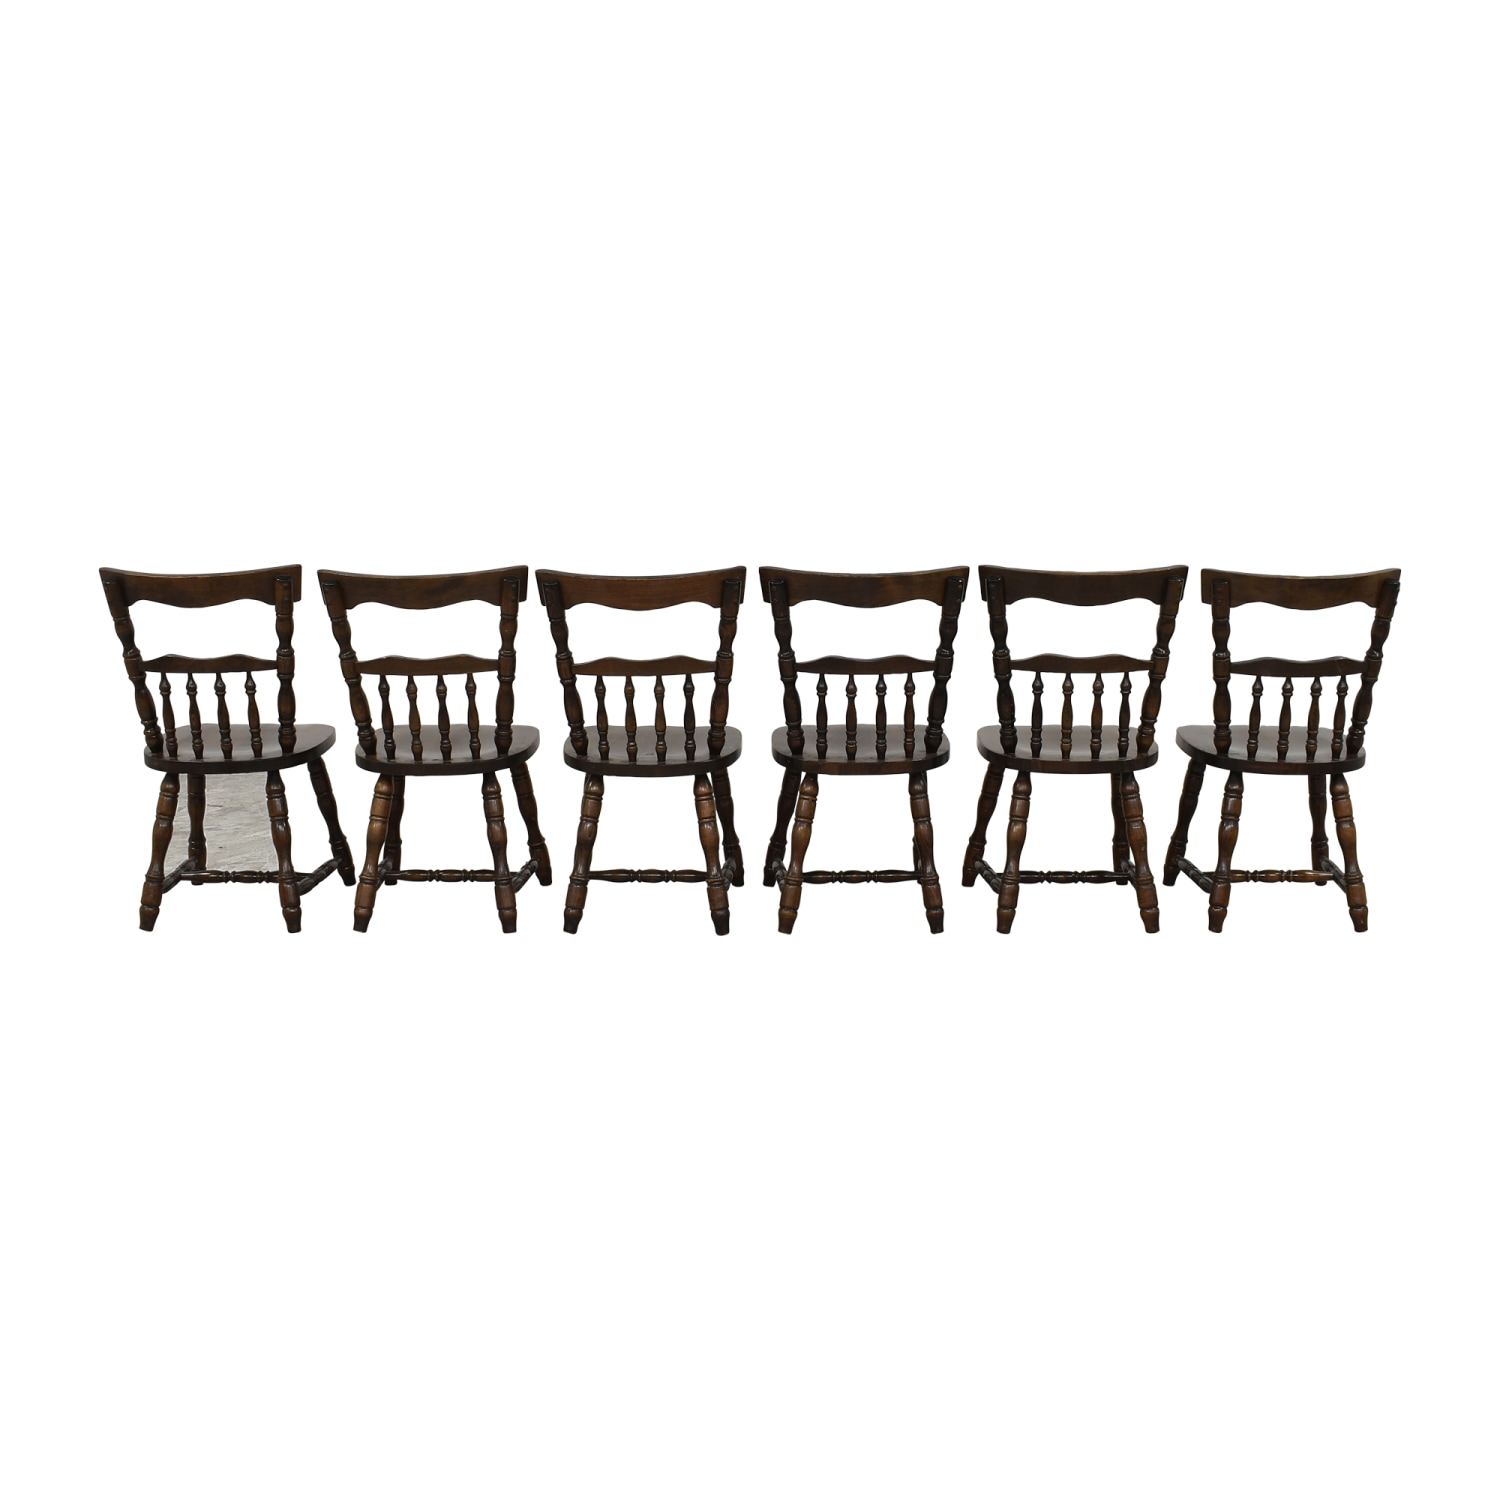  Traditional Dining Chairs  second hand